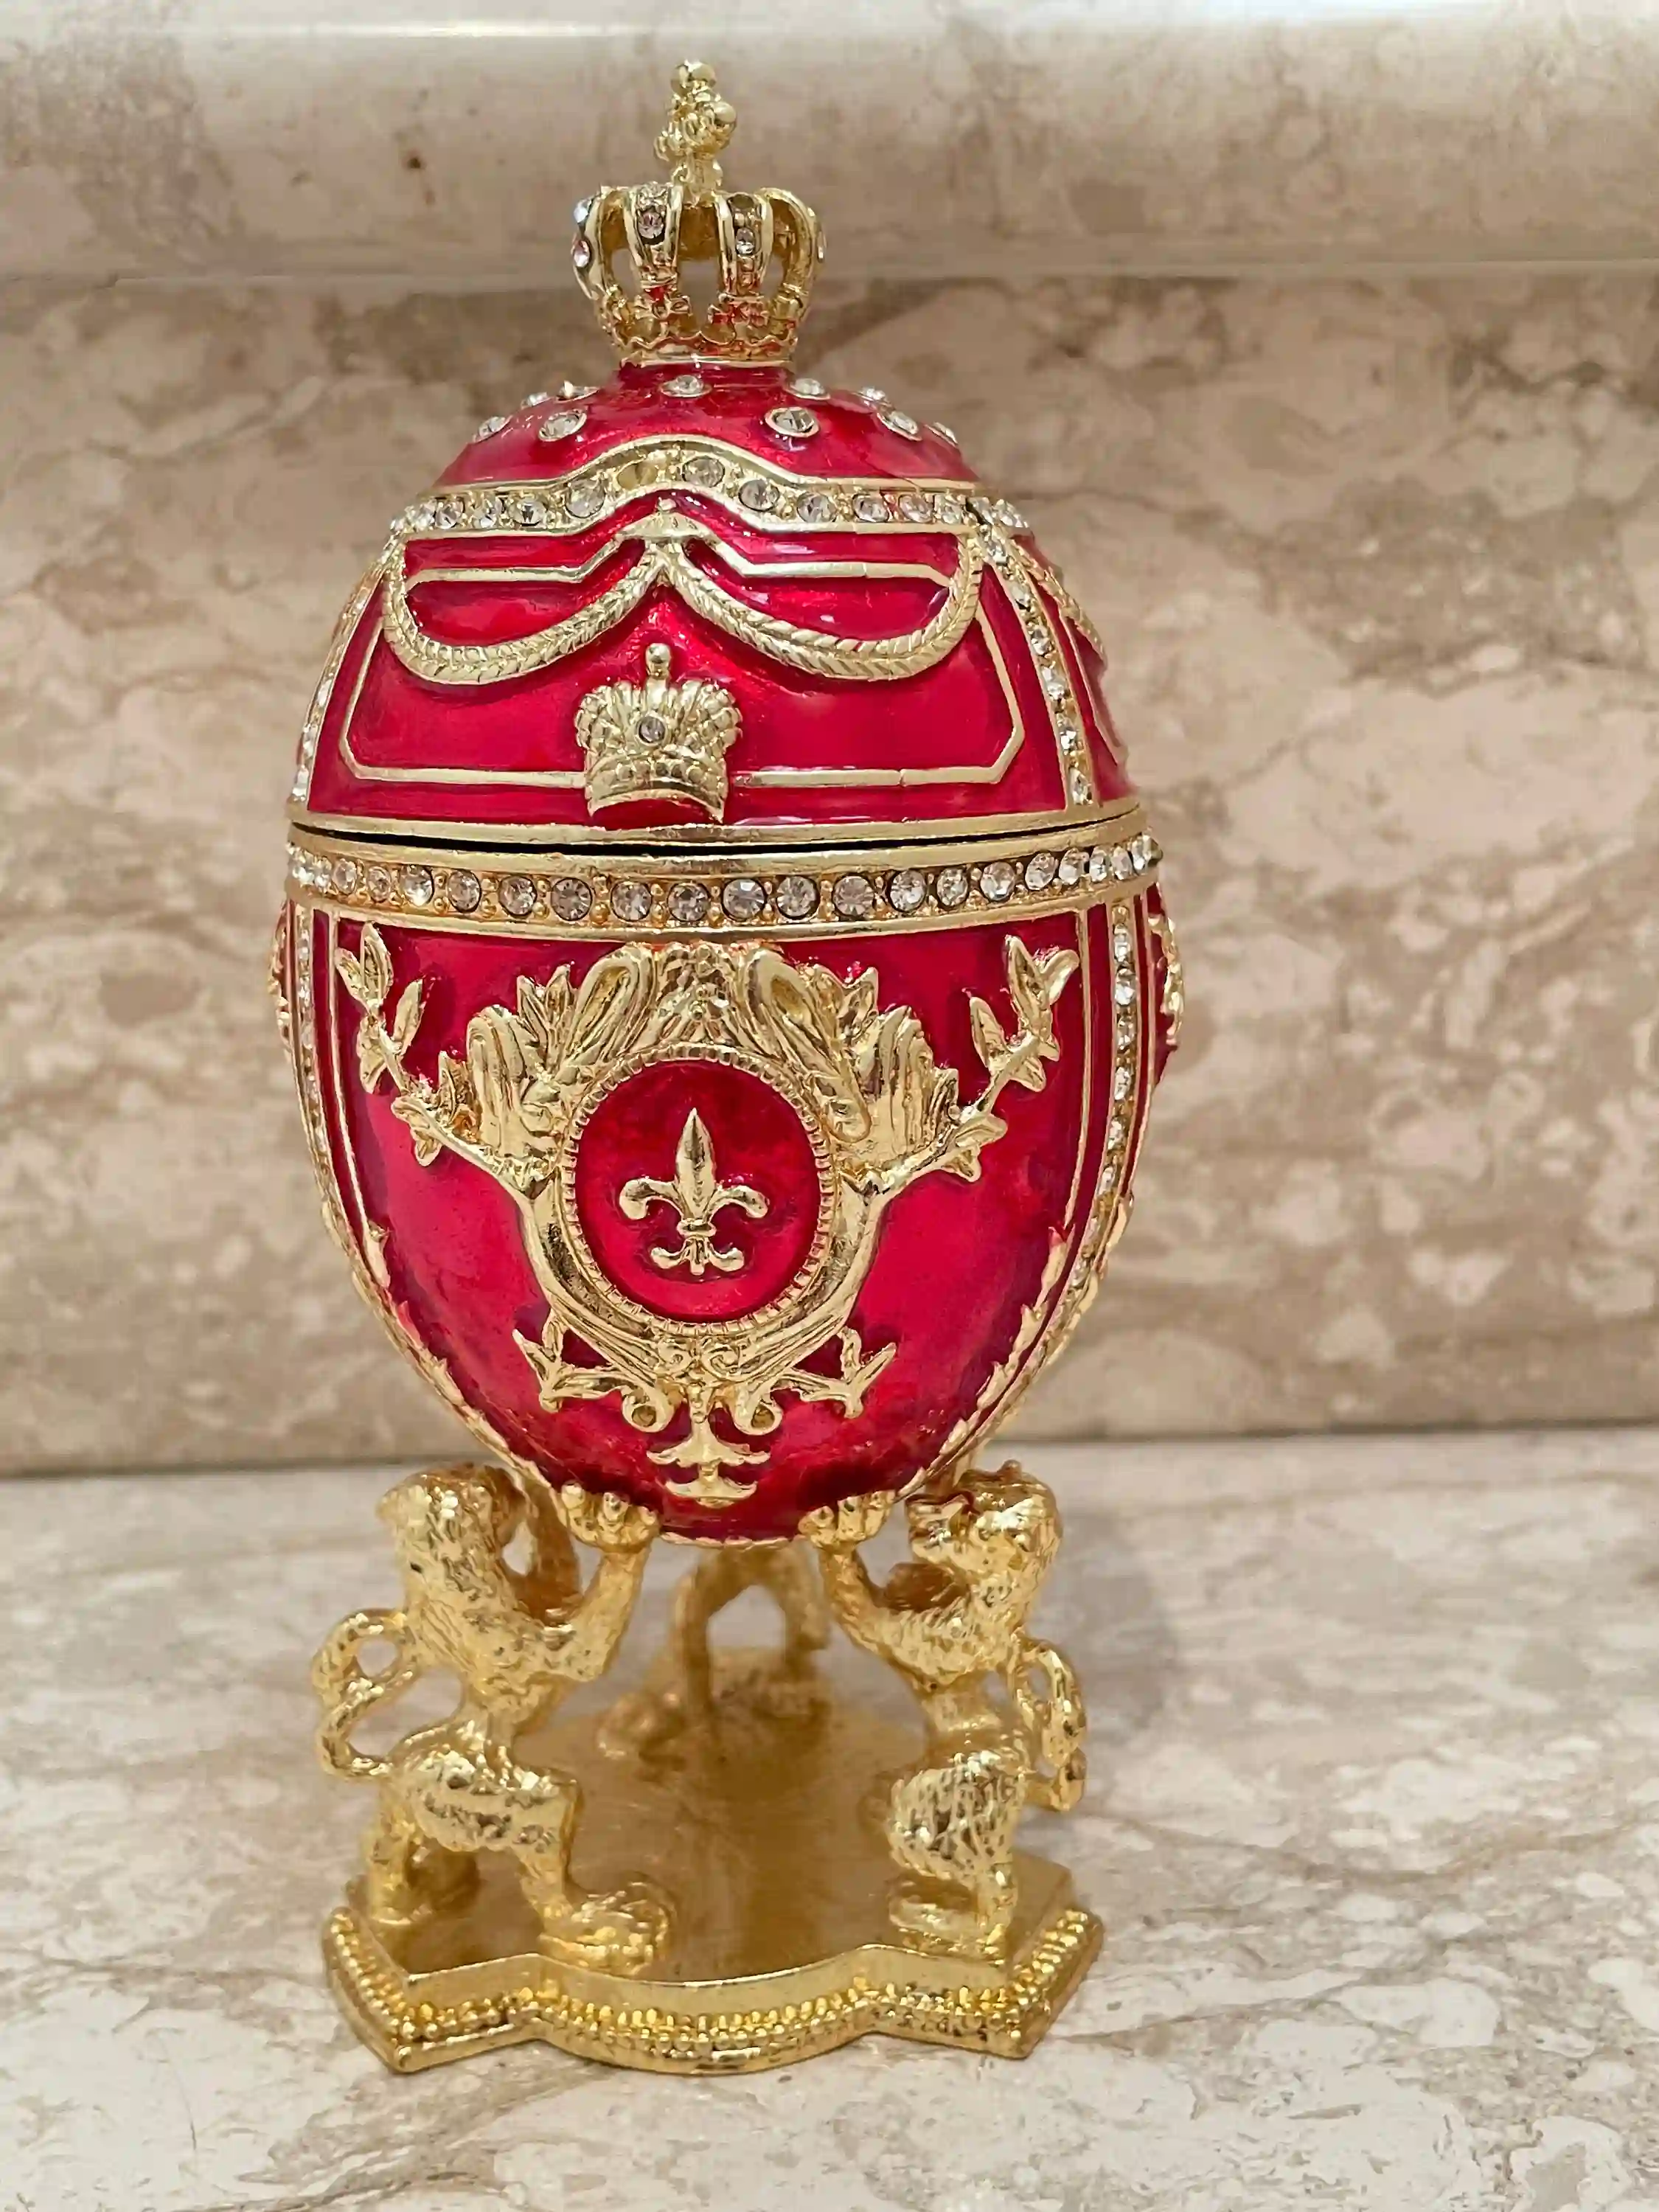 Ruby Red Faberge Egg Mom birthday Gift Faberge Trinket box 24kGold 200 AustrianCrystal HANDSET Faberge Love gifts for wife HANDMADE Ornament 